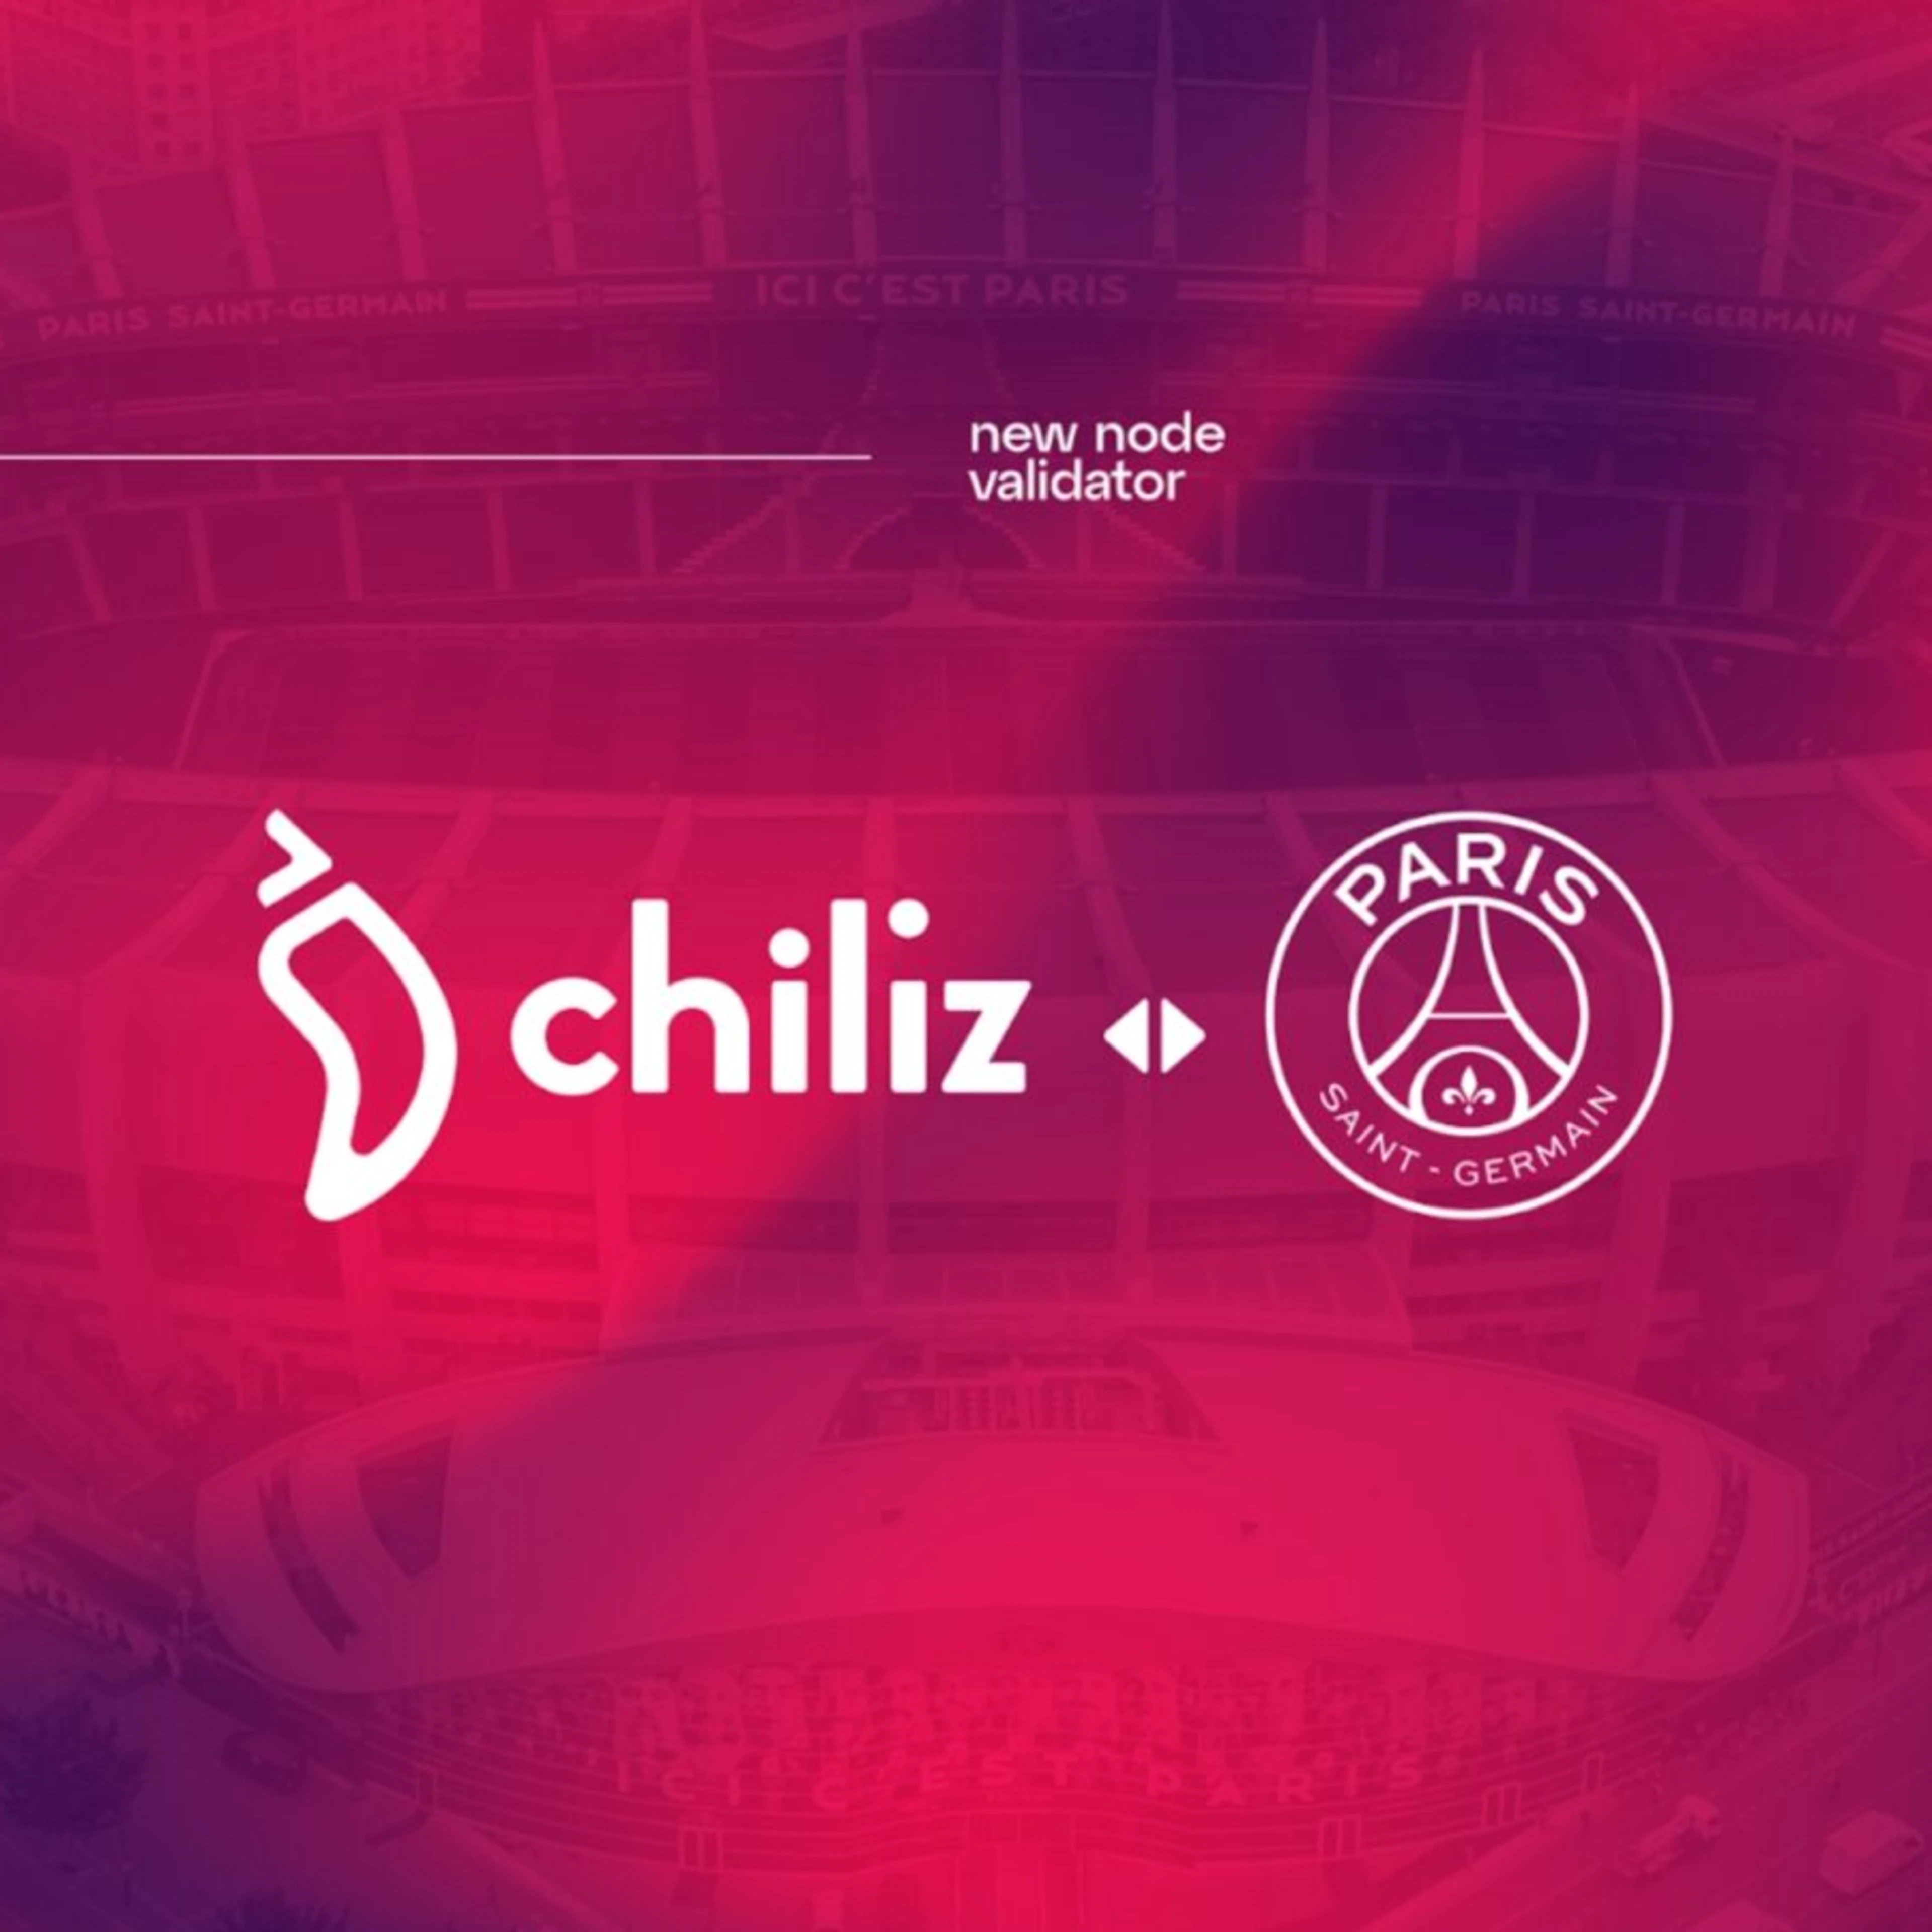 Paris Saint-Germain Partners with Chiliz Chain to Become the First-Ever Web3 Sports Club Validator